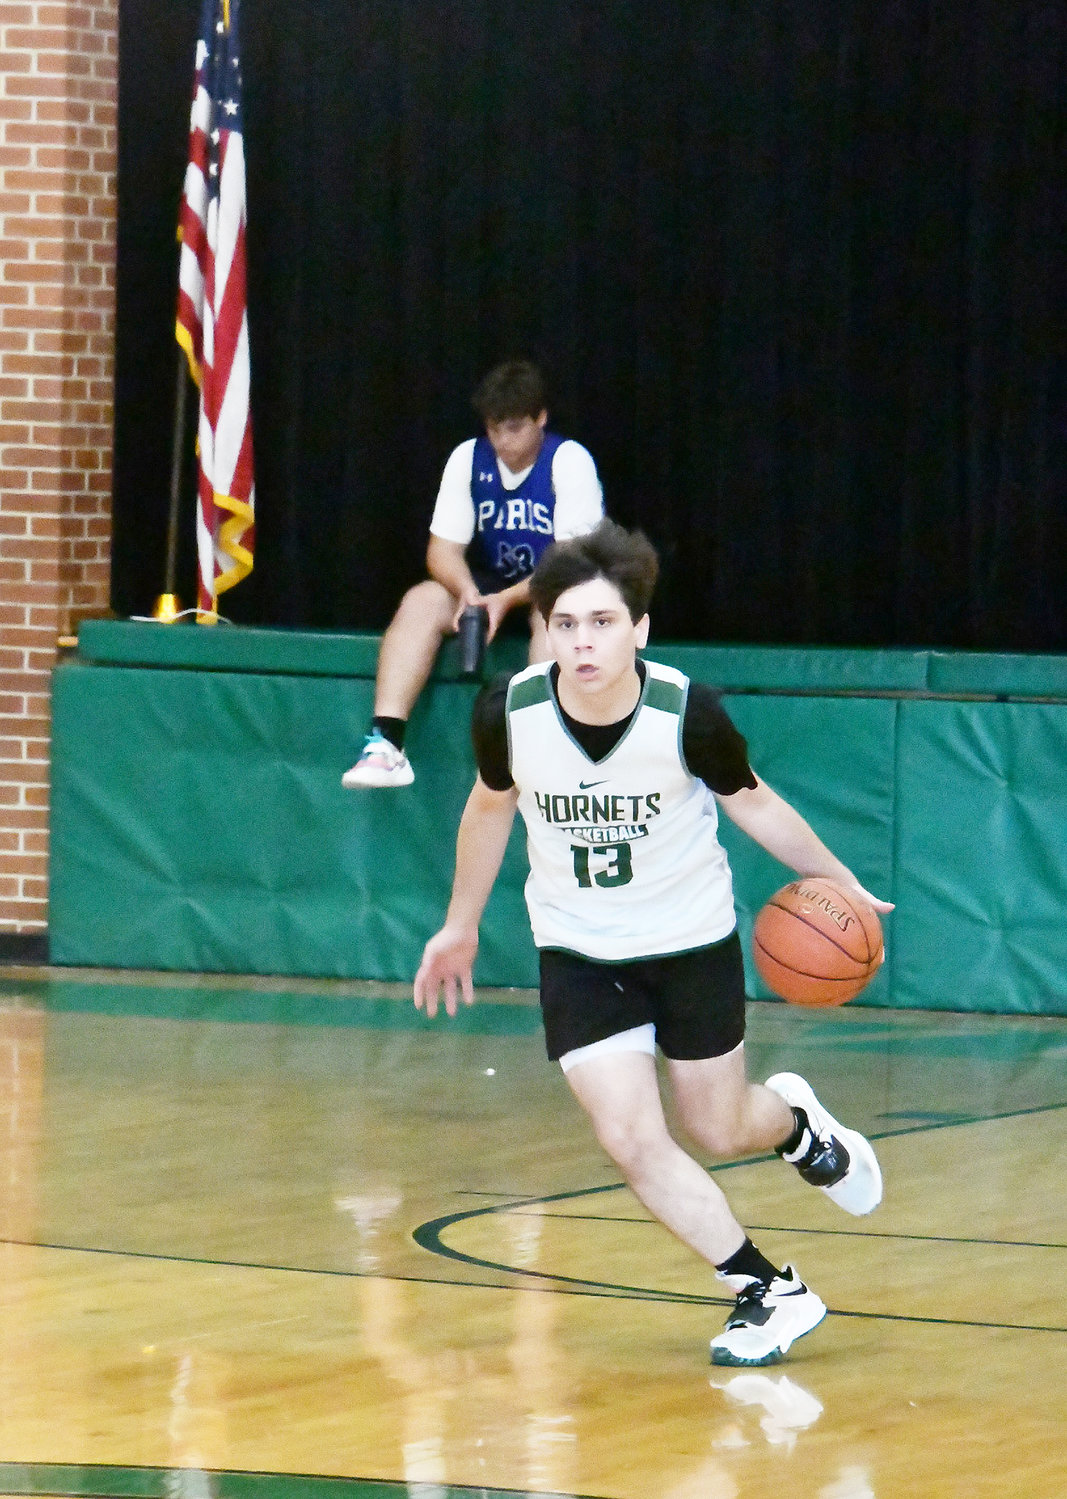 Junior Jace Chapman dribbles up court during a scrimmage in Huntsville on Tuesday, June 28.